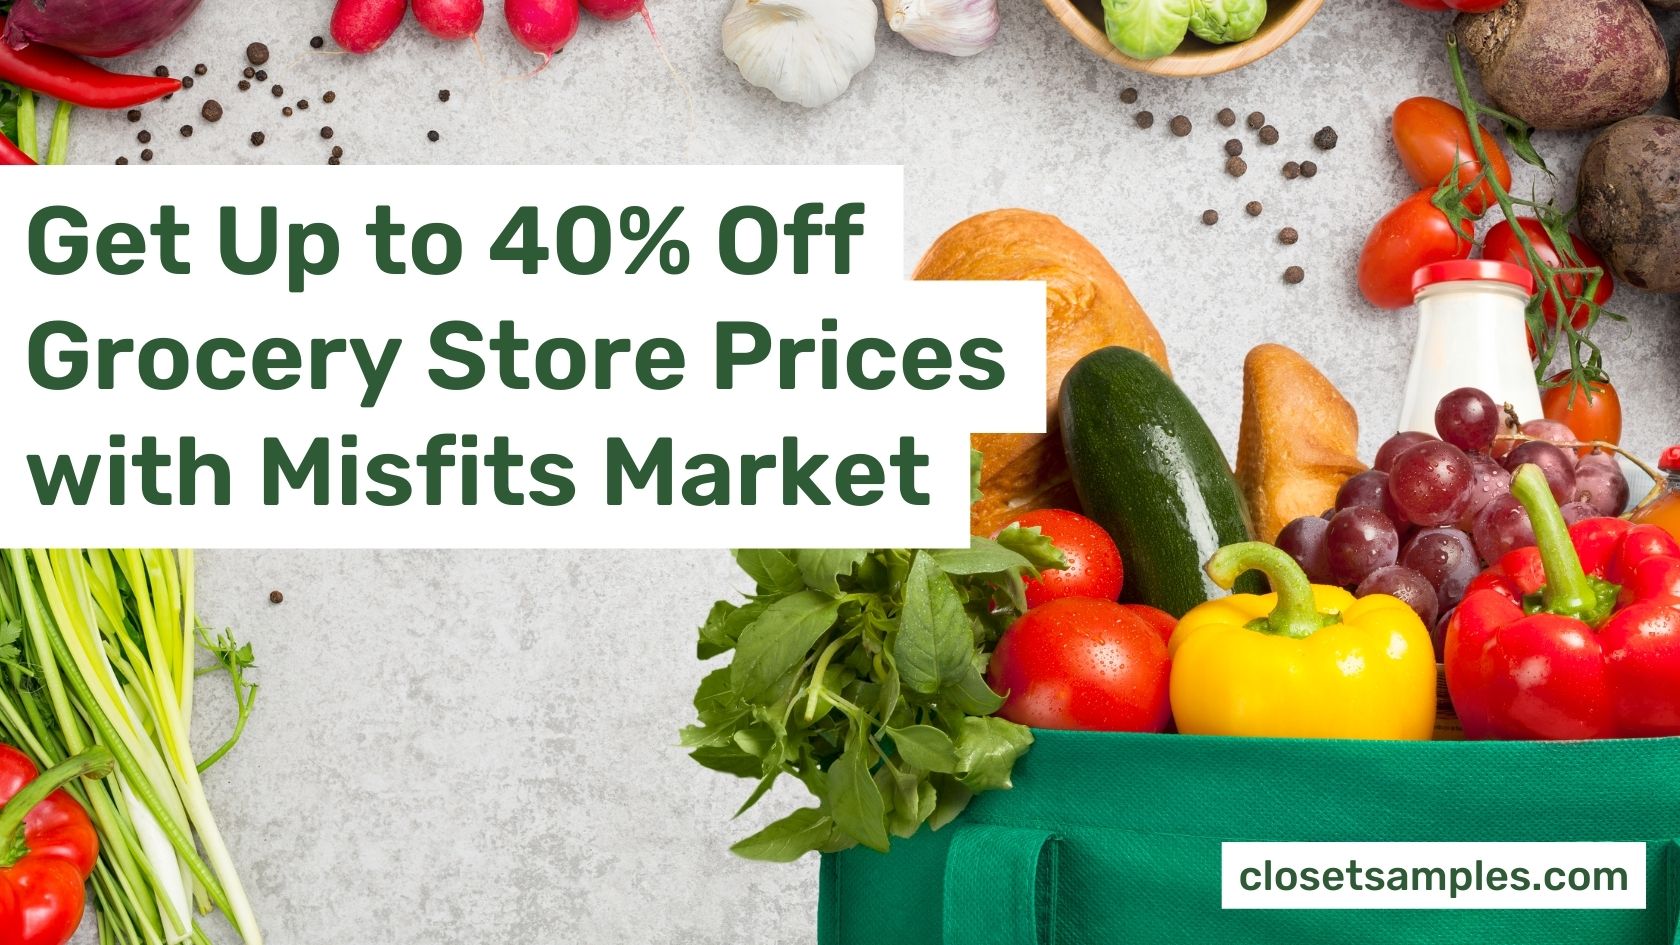 Get Up to 40 Off Grocery Store Prices with Misfits Market closetsamples